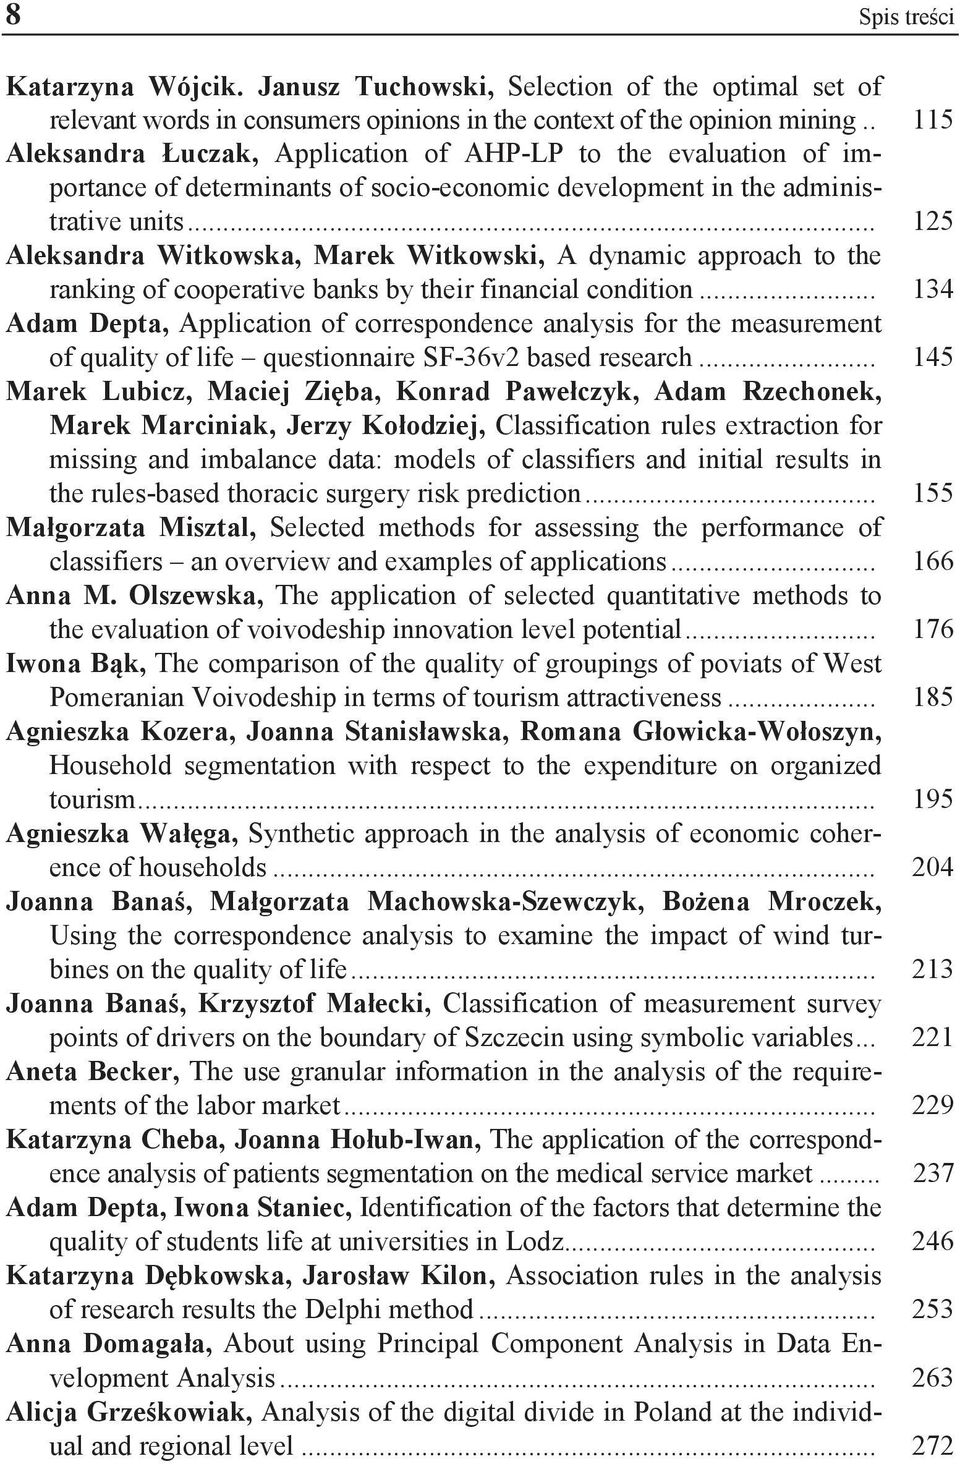 .. 125 A dynamic approach to the ranking o cooperative banks by their inancial condition.